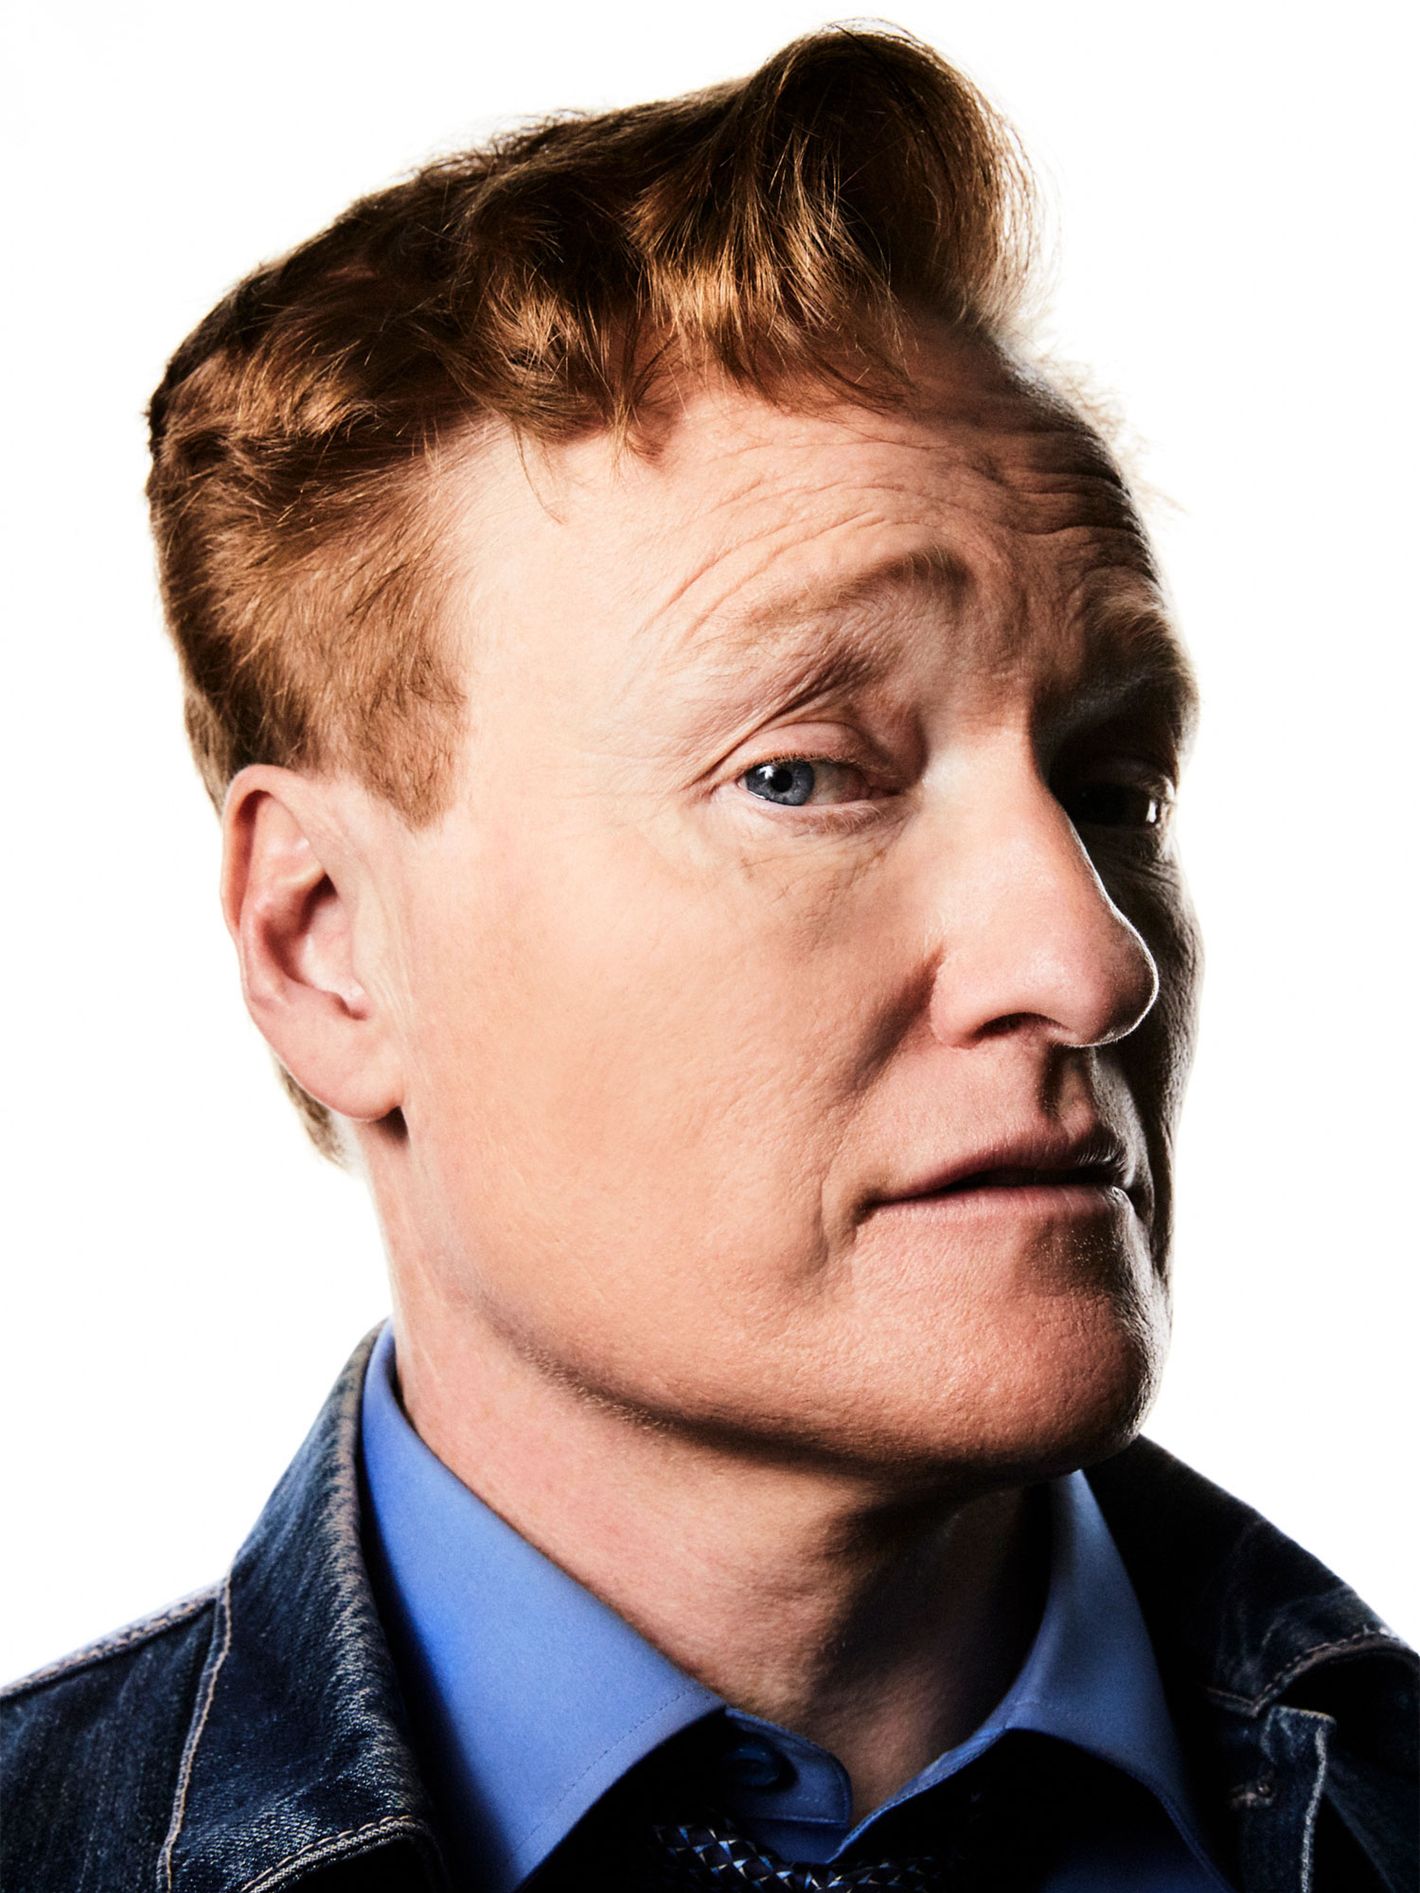 Conan O'Brien says that Trump hurting comedy is his biggest